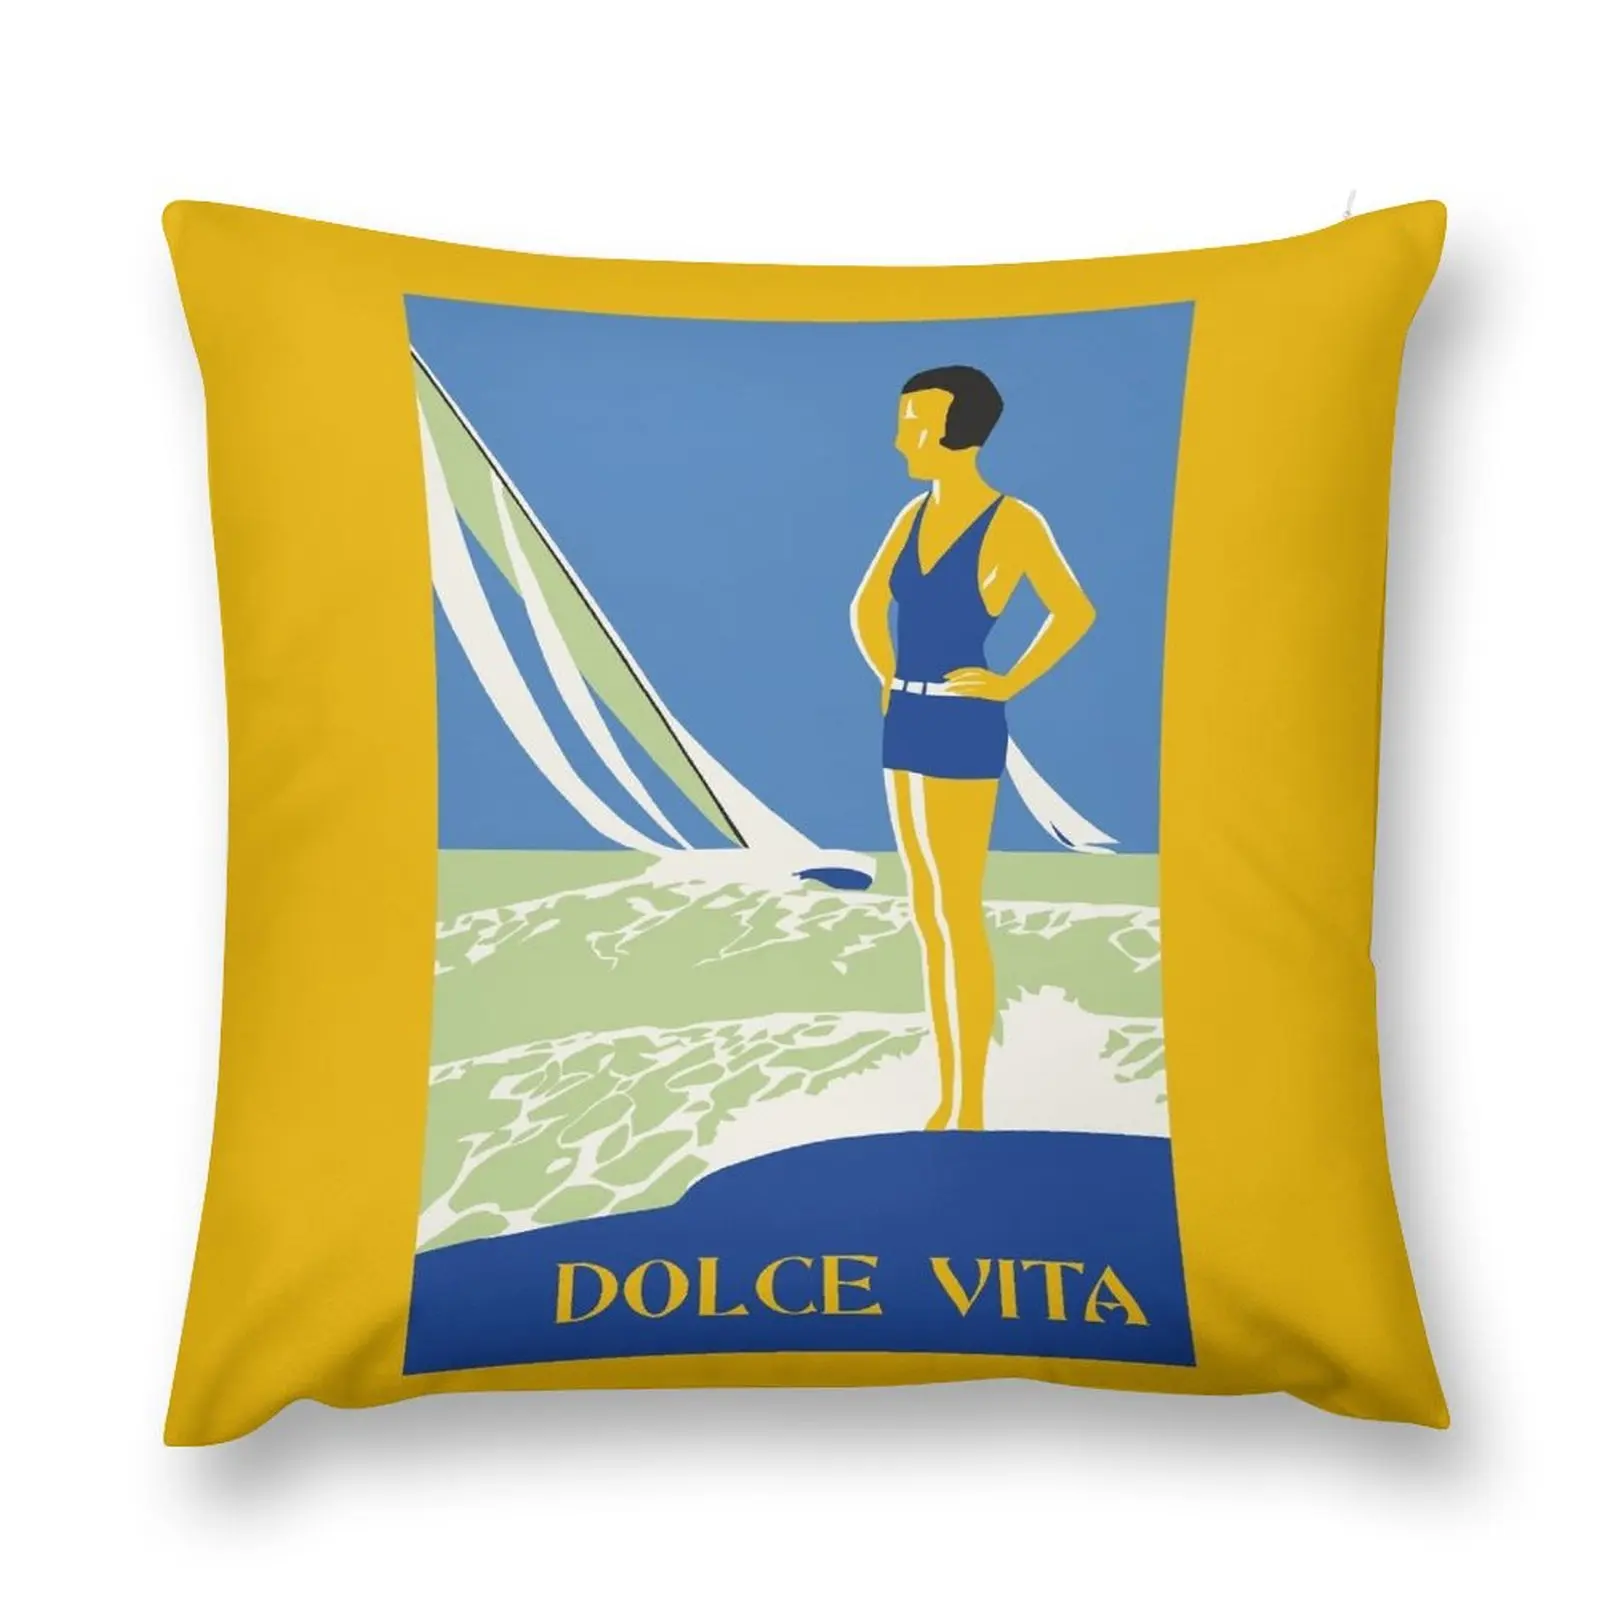 

Dolce vita, jazz age deco style beach seaside summer travel Throw Pillow Decorative Cushions Embroidered Cushion Cover